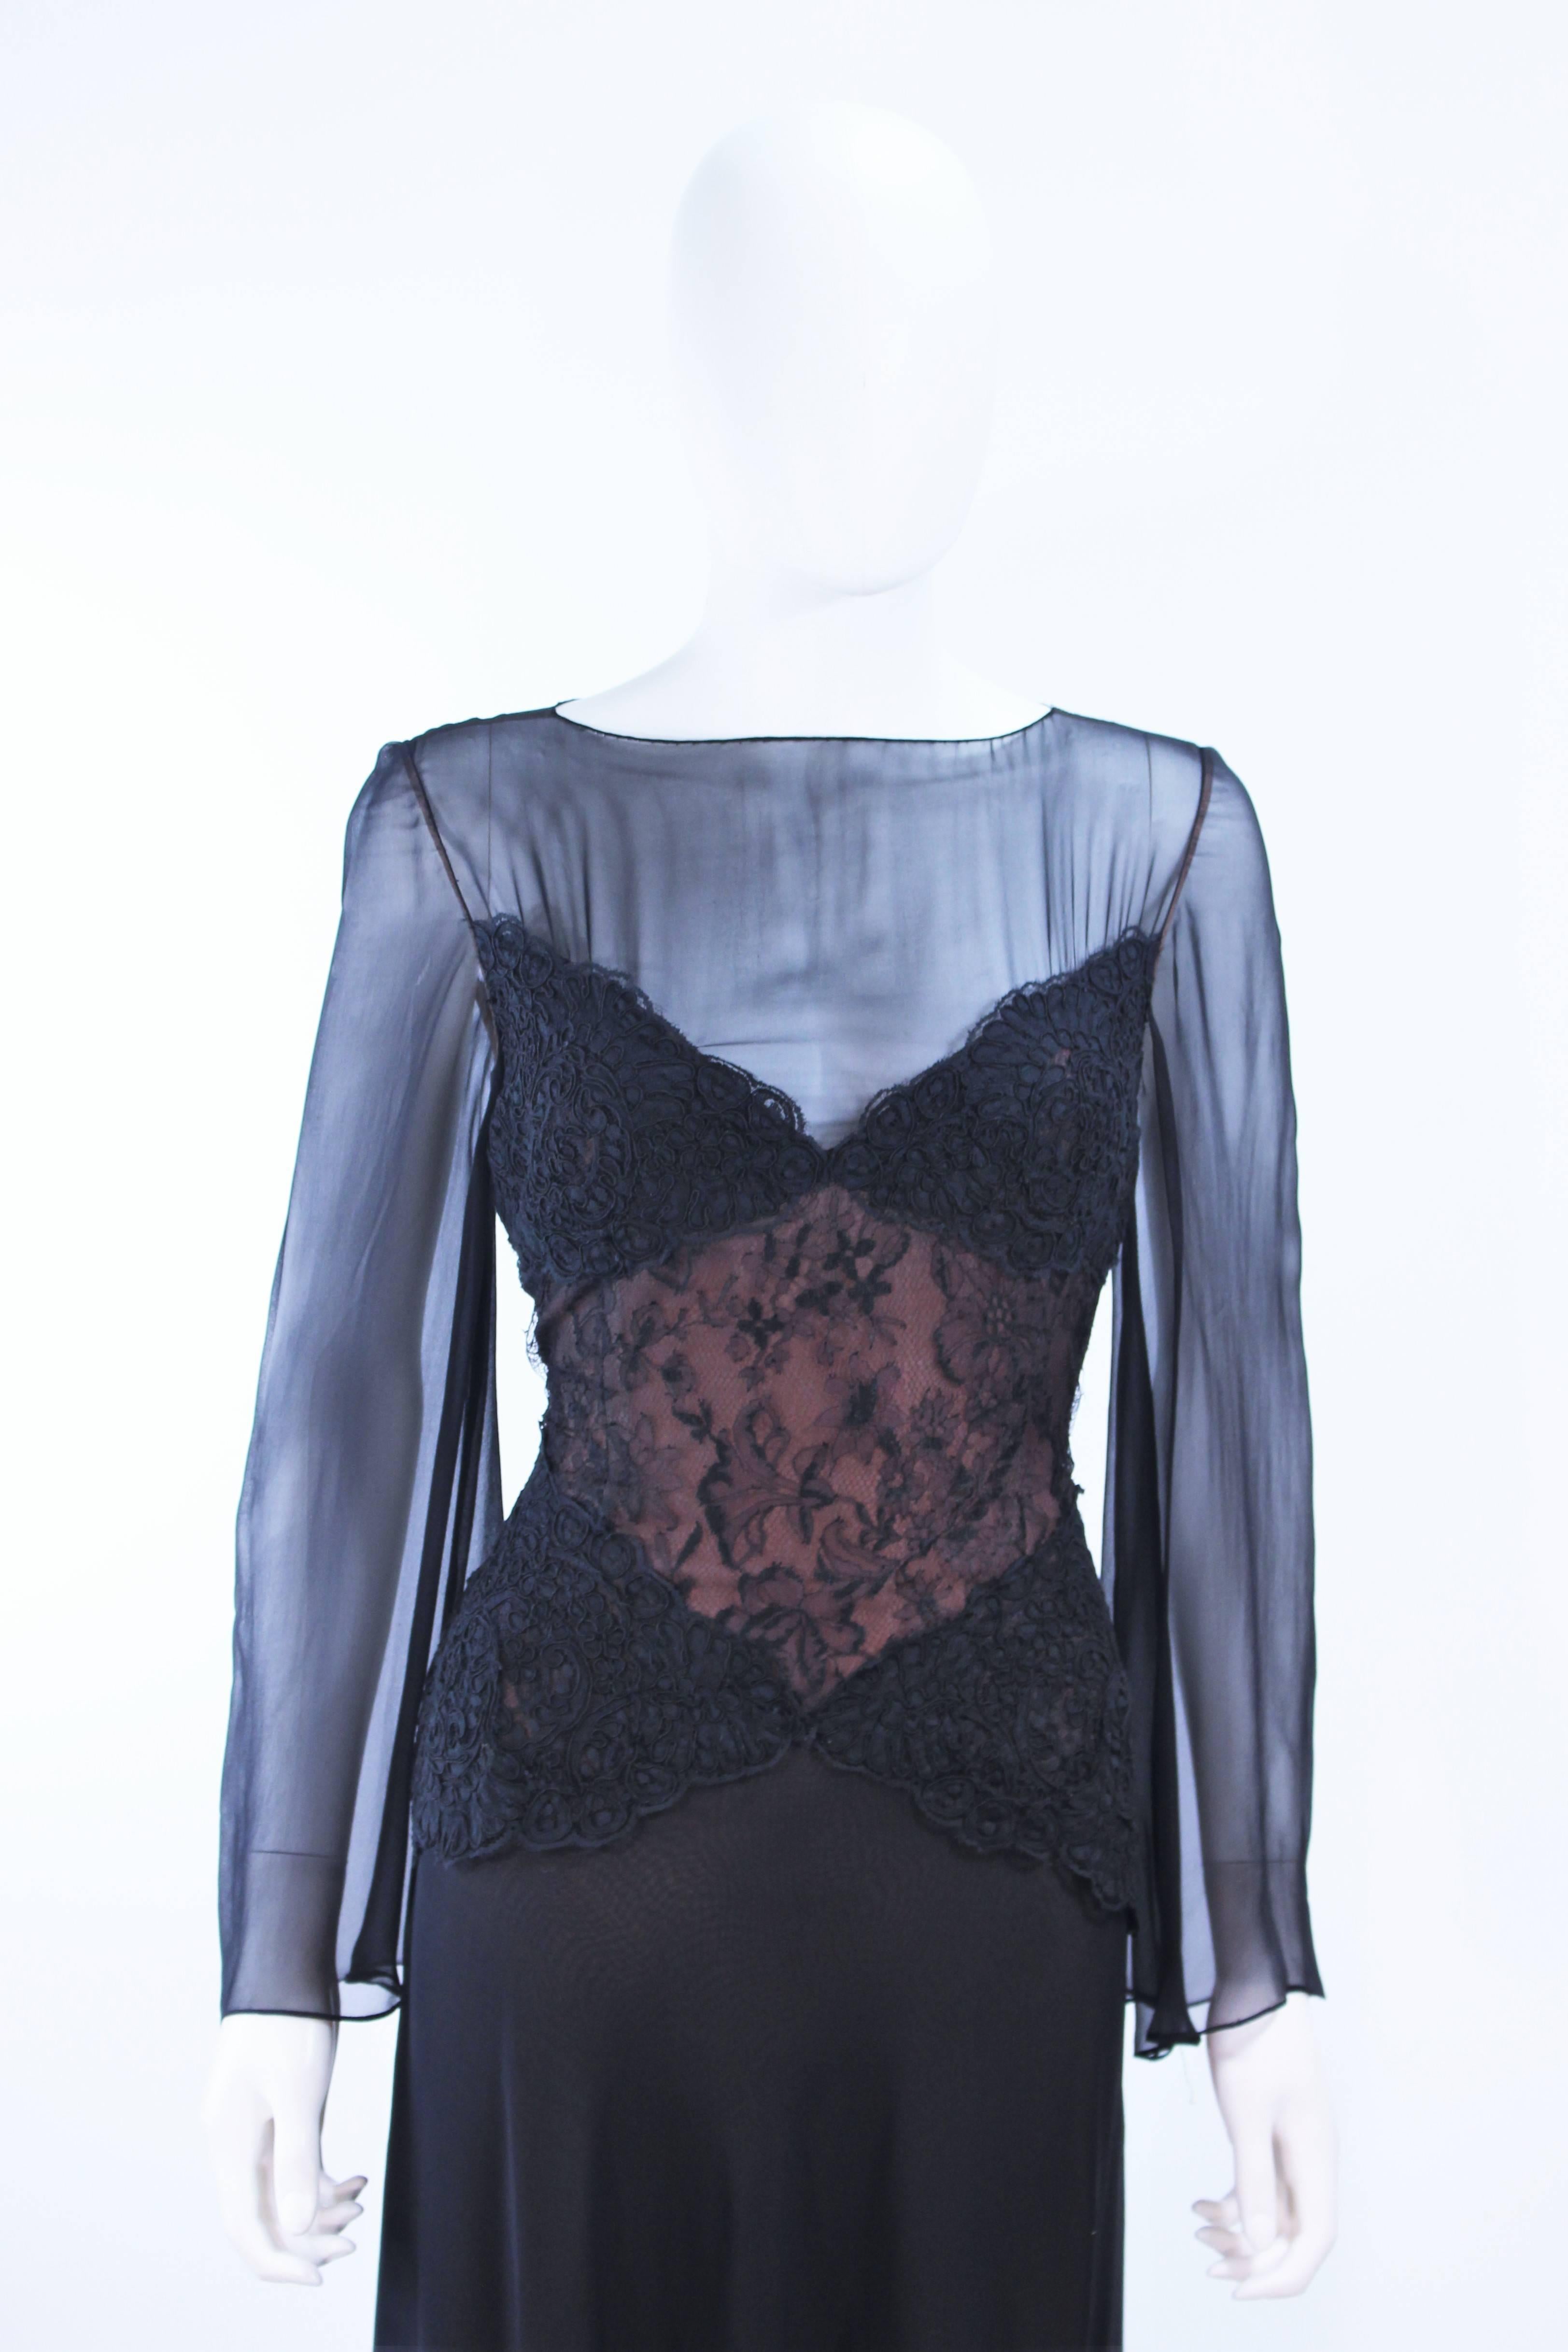 BILL BLASS Black Lace Chiffon Gown with Nude Underlay Size 10 12 In Excellent Condition For Sale In Los Angeles, CA